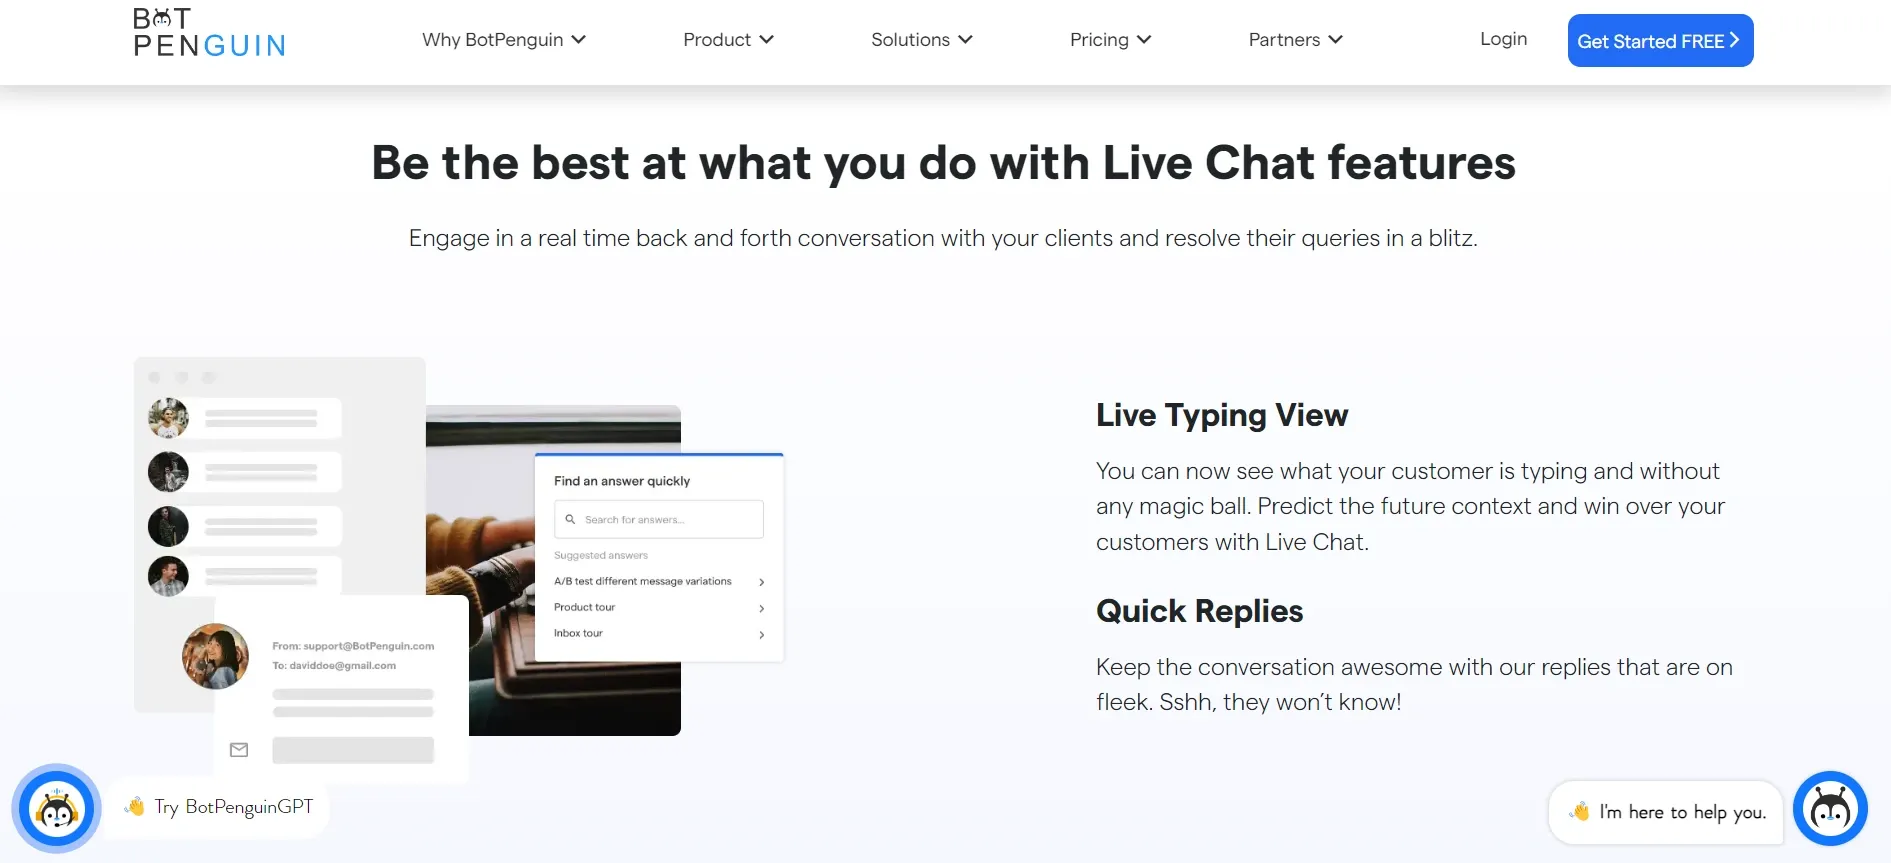 Who Should Implement Live Chat?